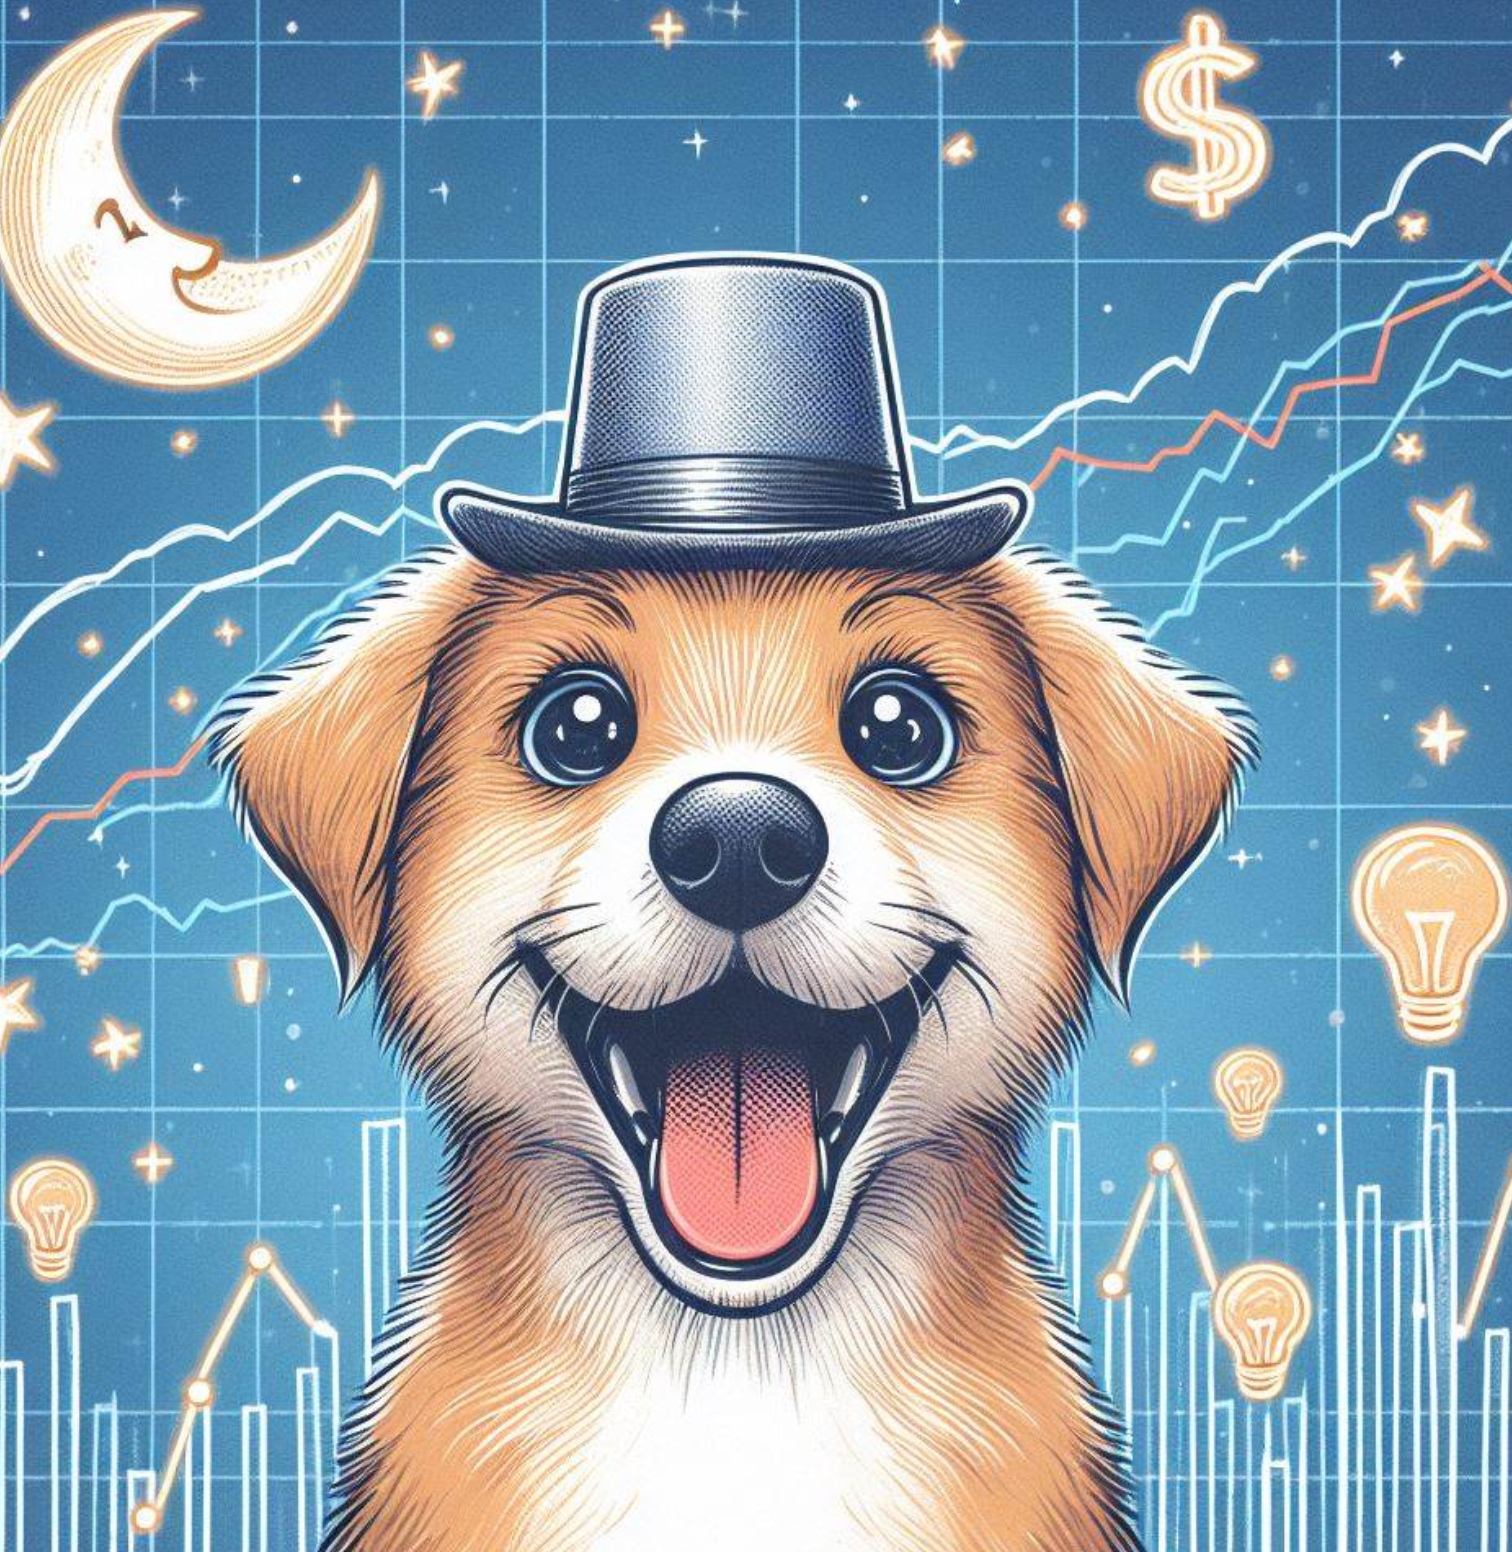 A playful cartoon dog wearing a tiny hat, surrounded by soaring price charts and moon symbols. The dog’s eyes wide with excitement, capturing the whimsical spirit of Dogwifhat